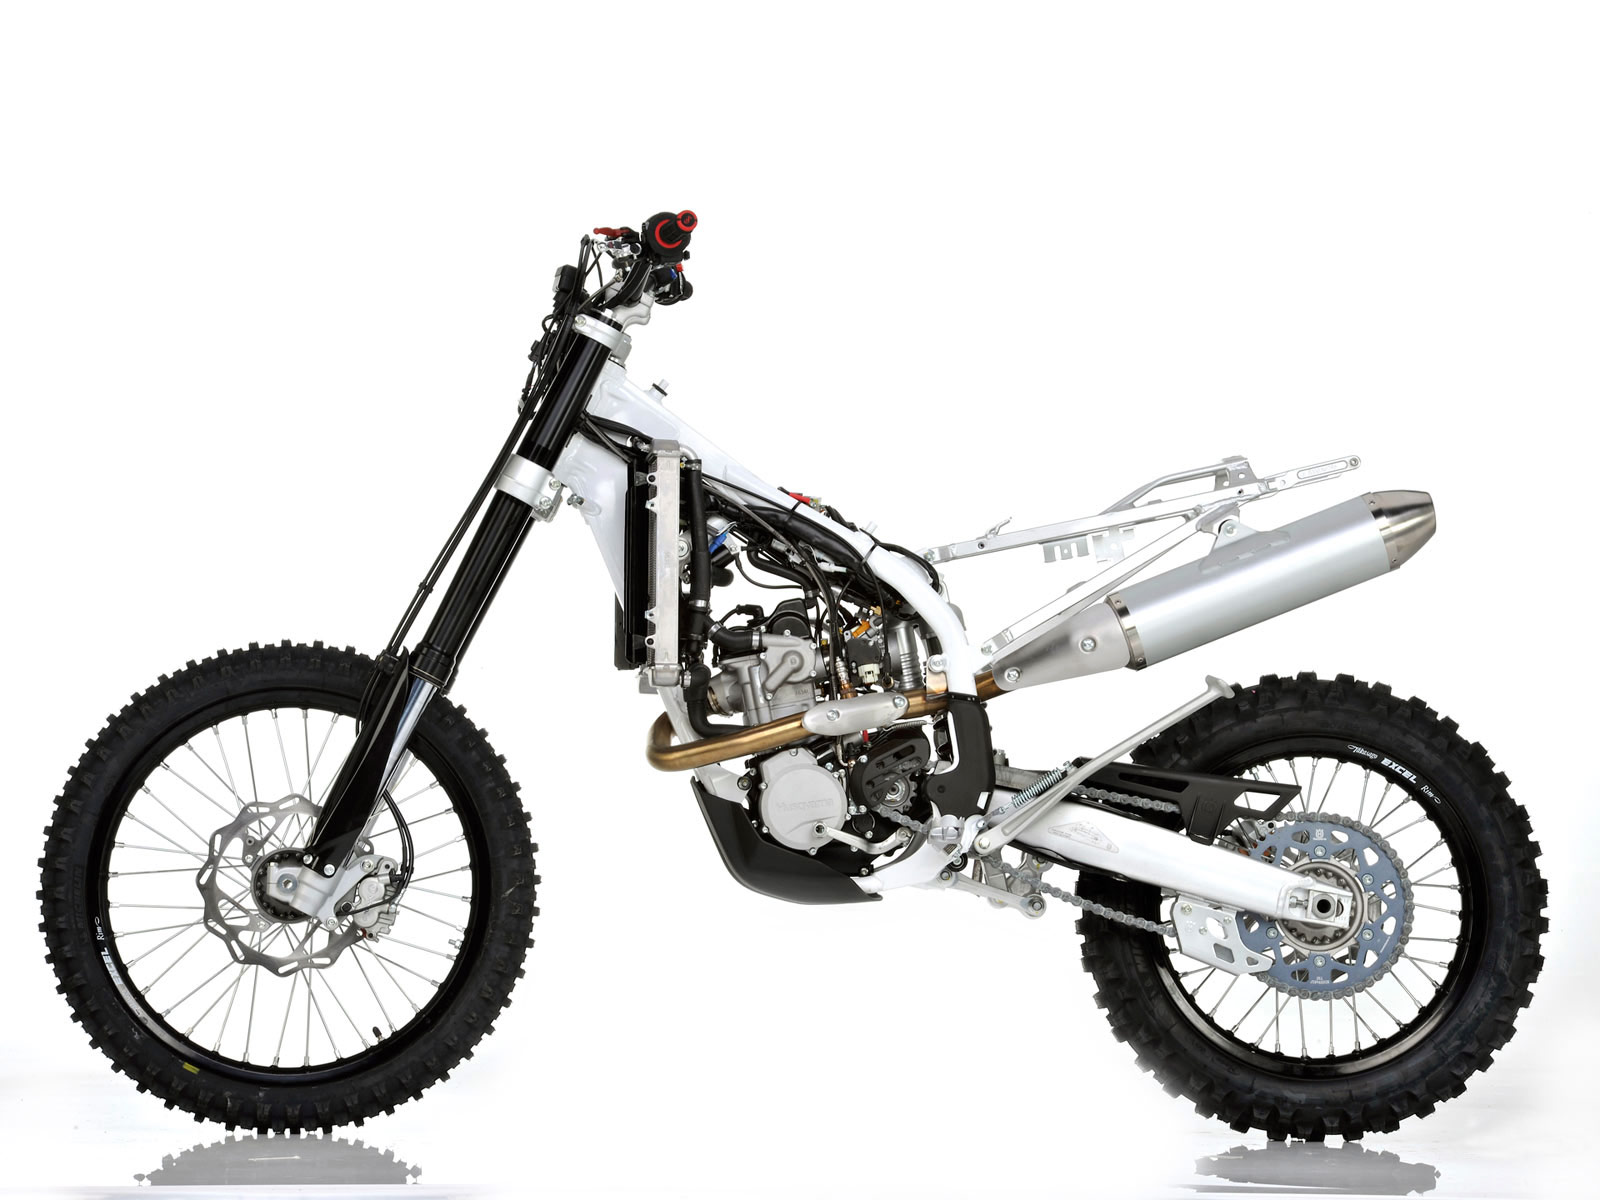 auto insight 2011: 2010 HUSQVARNA TE310 wallpapers | accident lawyers